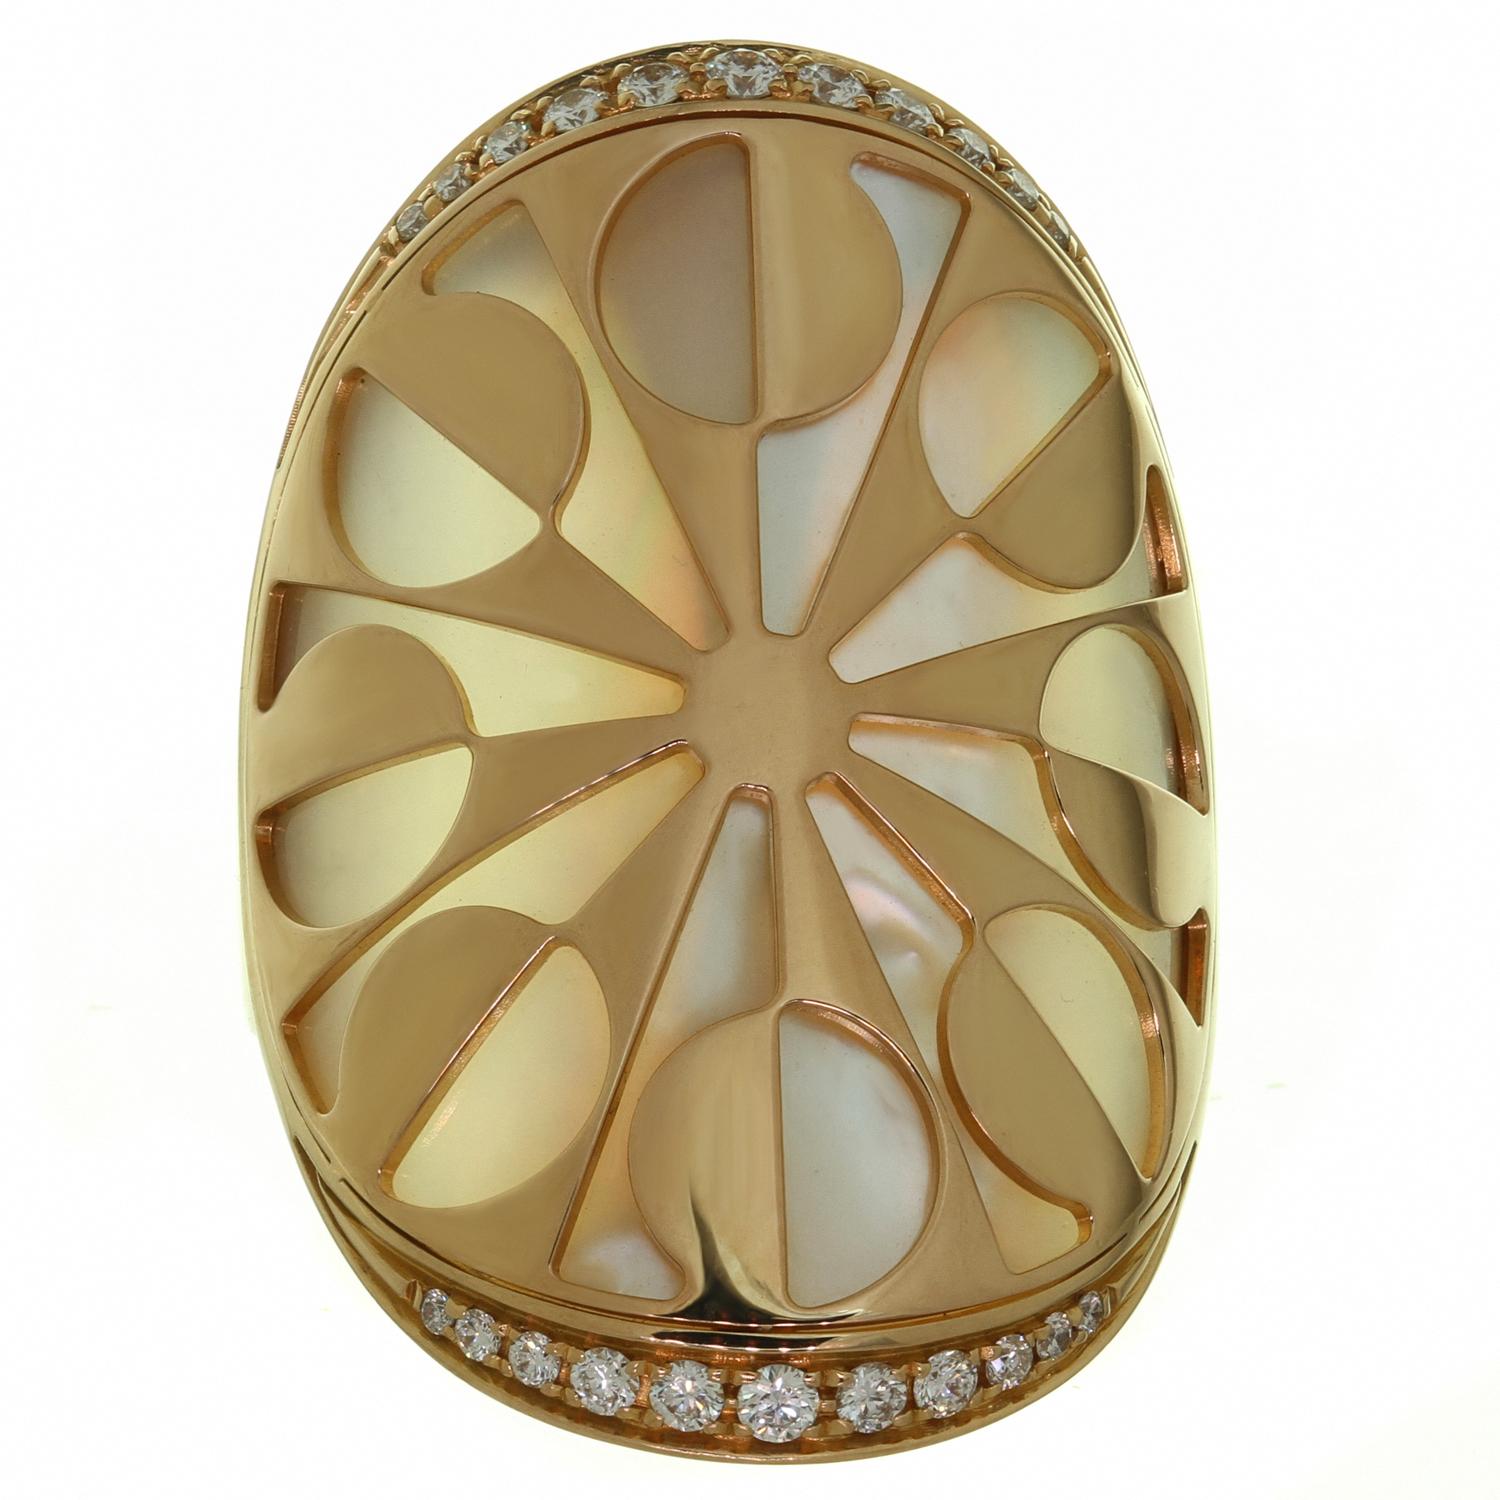 BVLGARI Intarsio Diamond Mother-of-Pearl Rose Gold Ring Size 51 In Excellent Condition For Sale In New York, NY